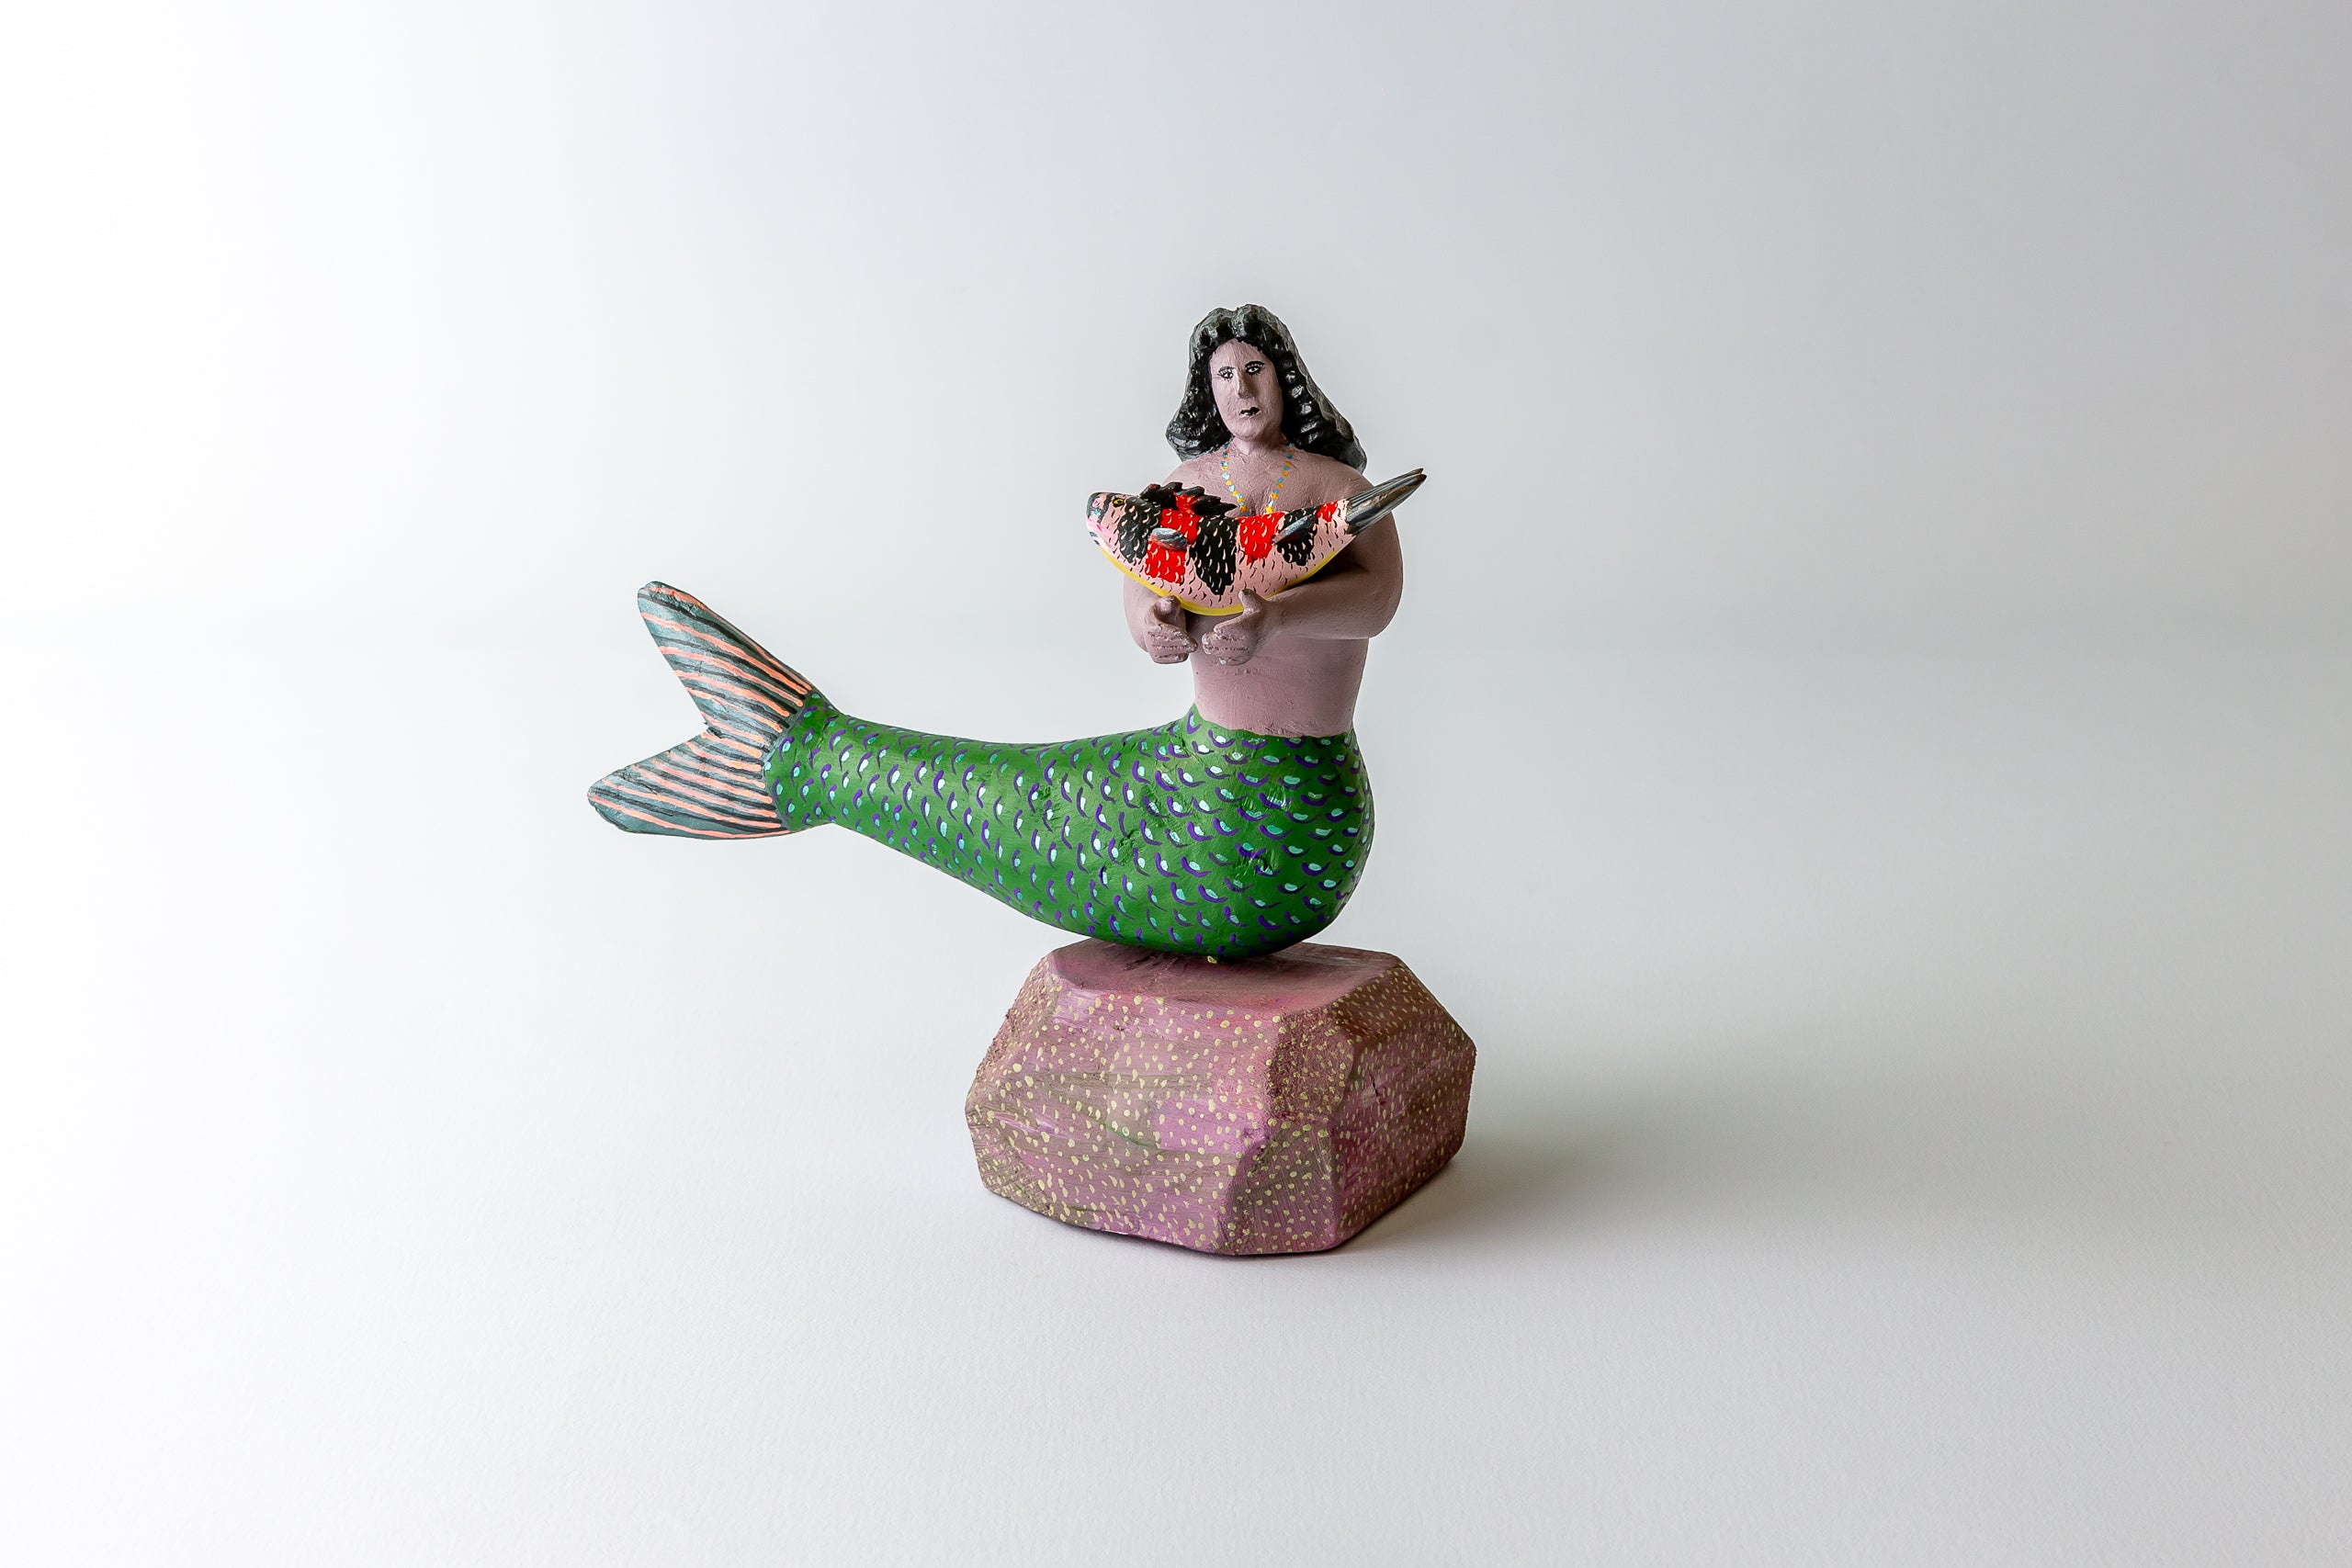 A beautiful mermaid with fine features carying a large fish.